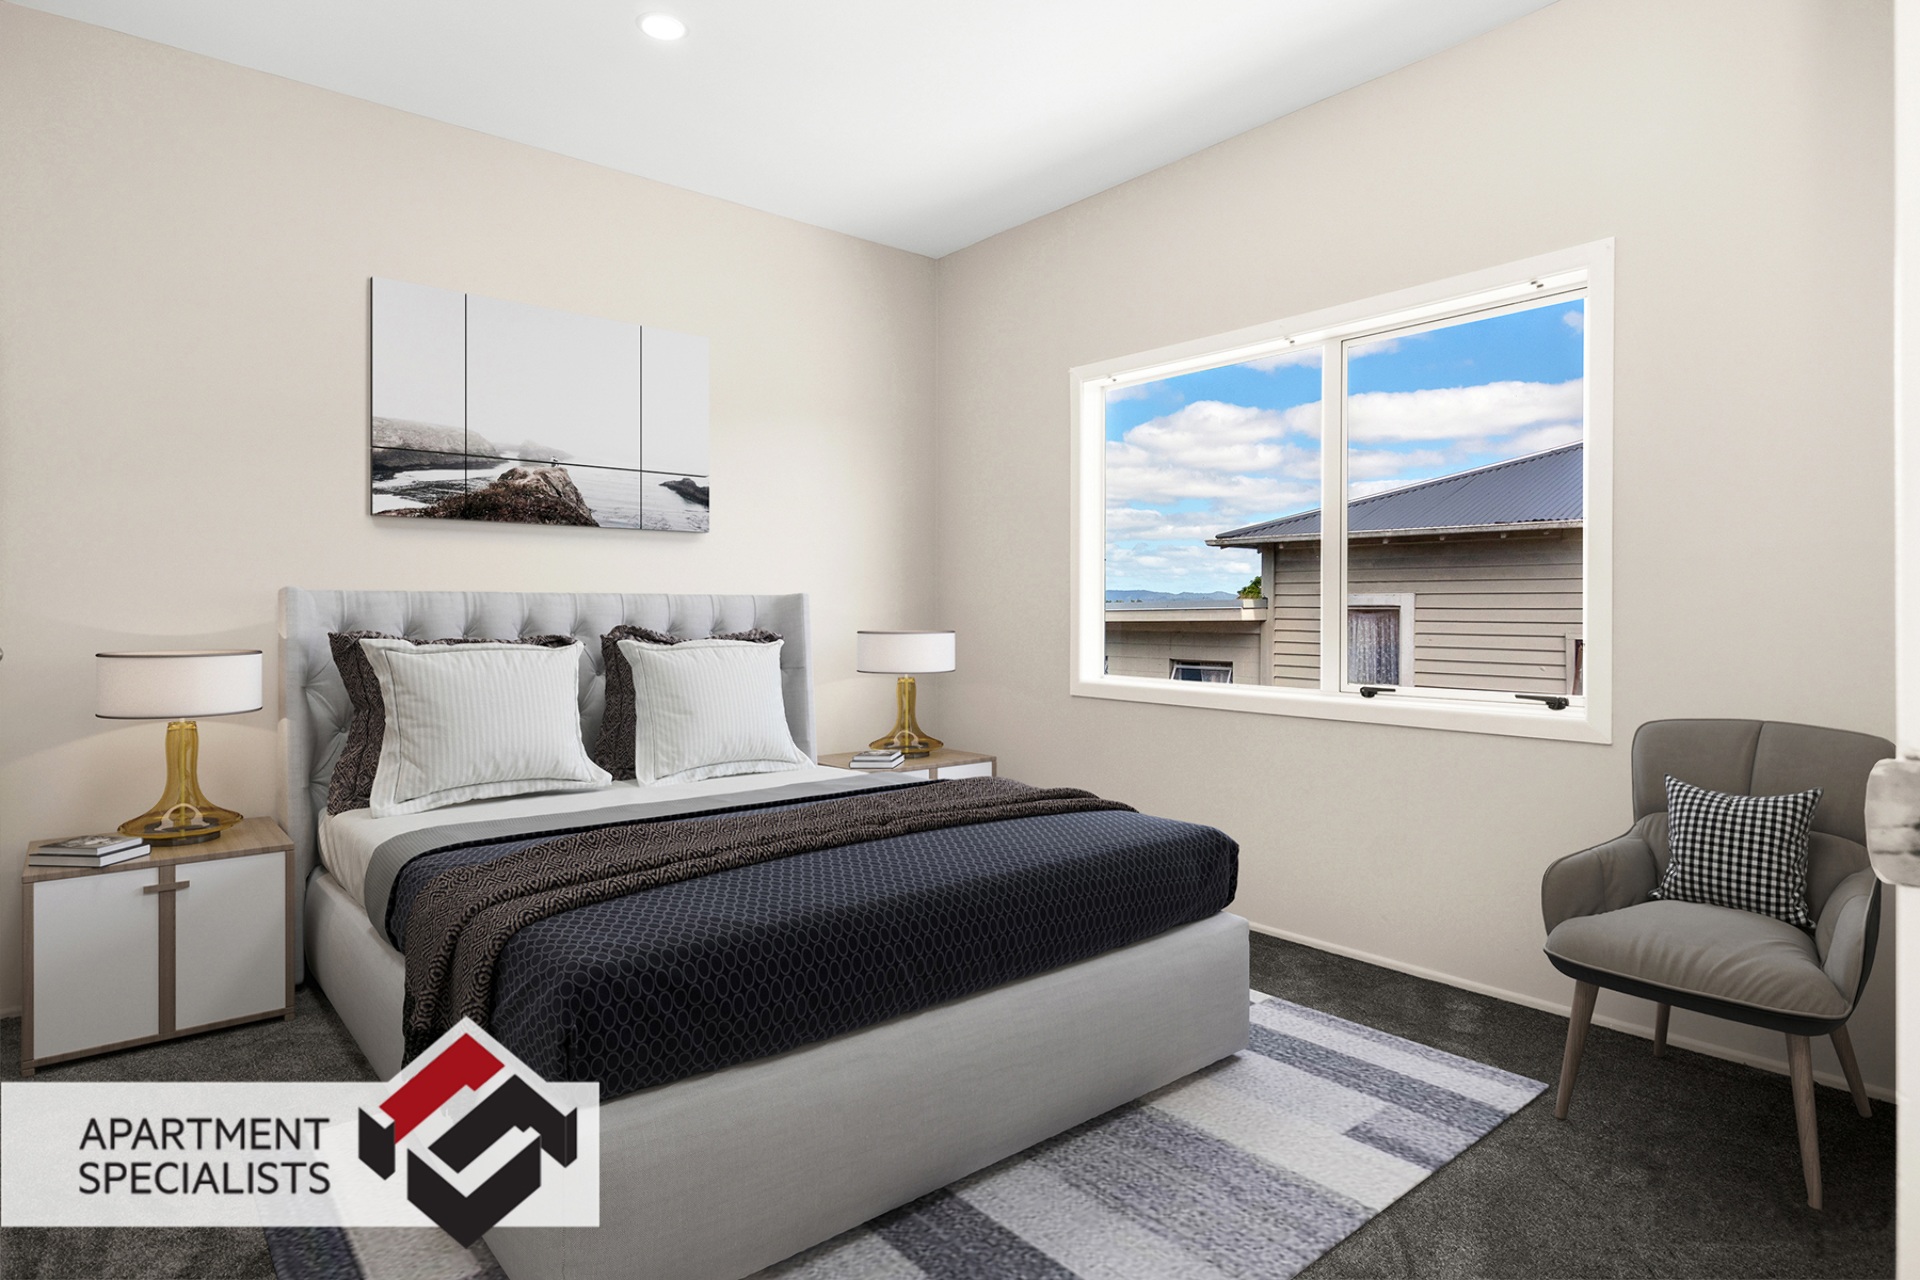 0 | 325 Mount Albert Road, Mount Roskill | Apartment Specialists